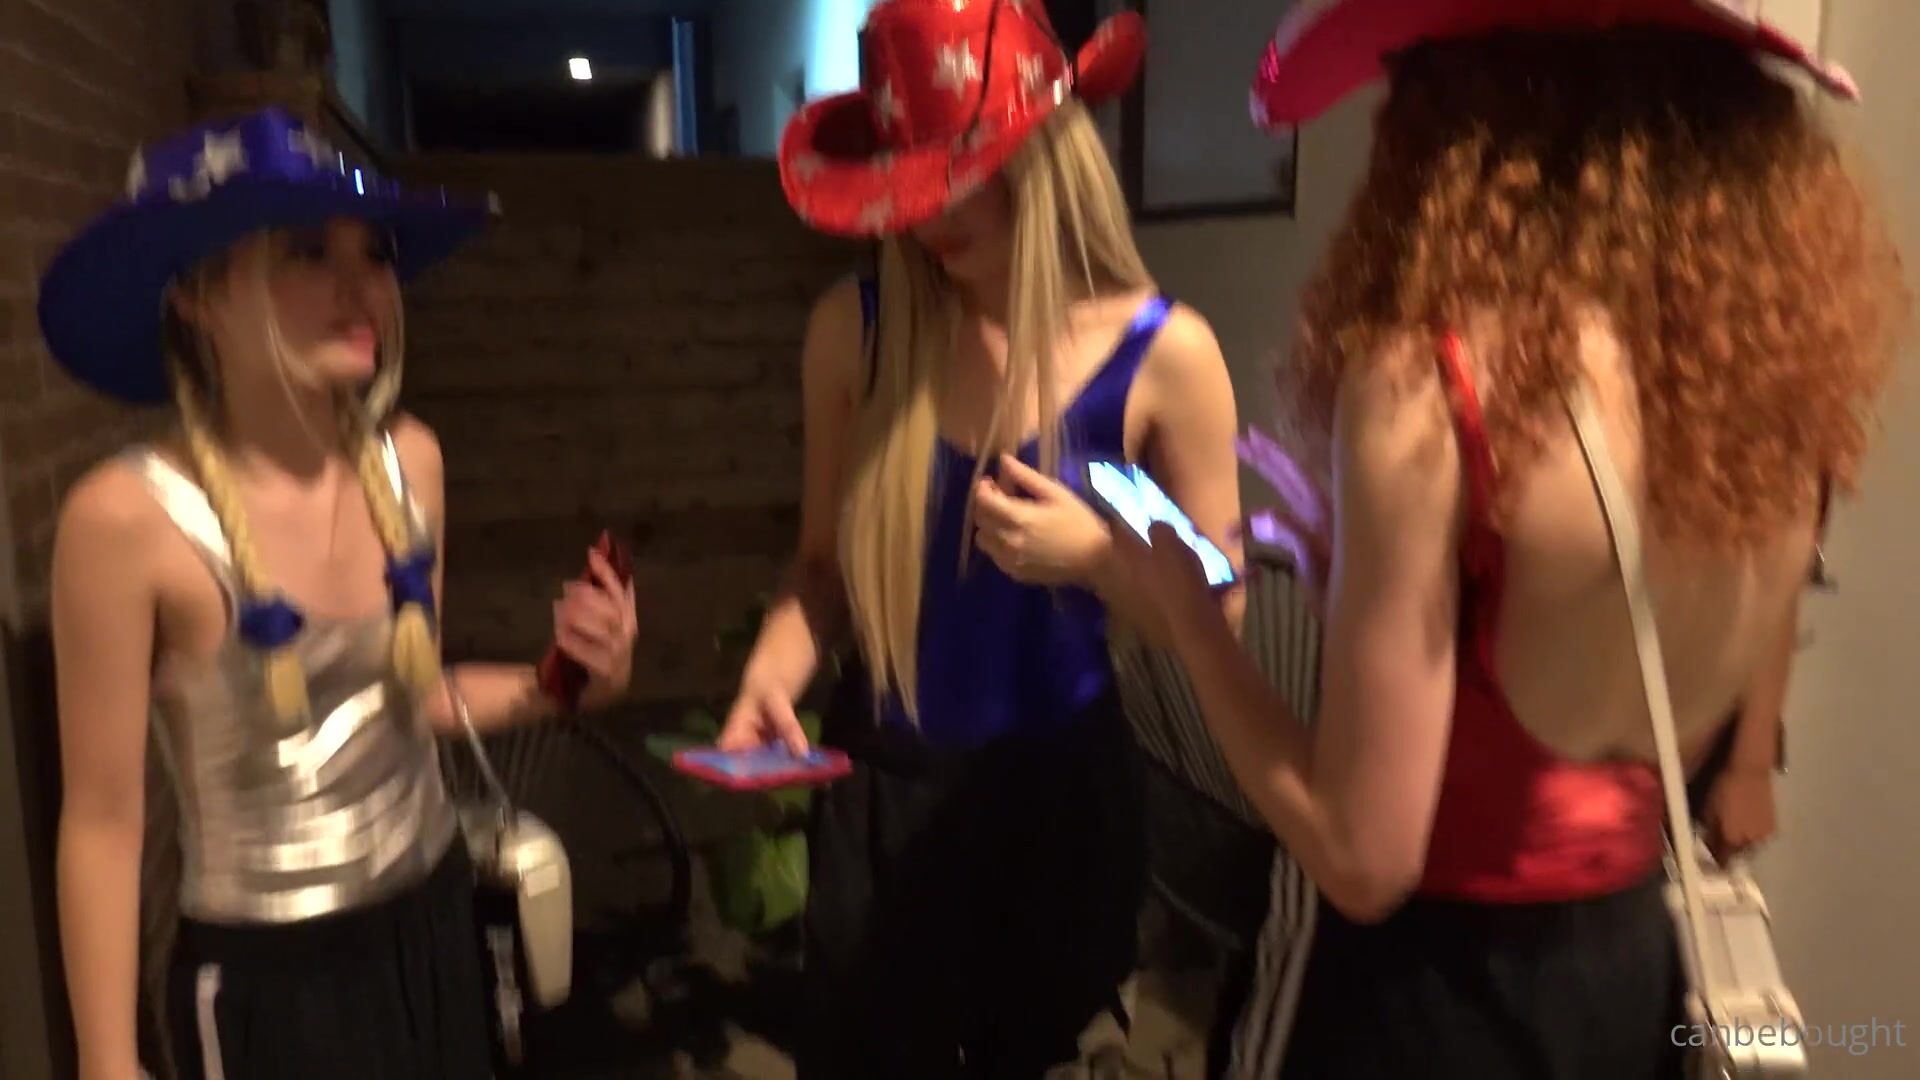 canbebought 4th of July lesbian party vlog